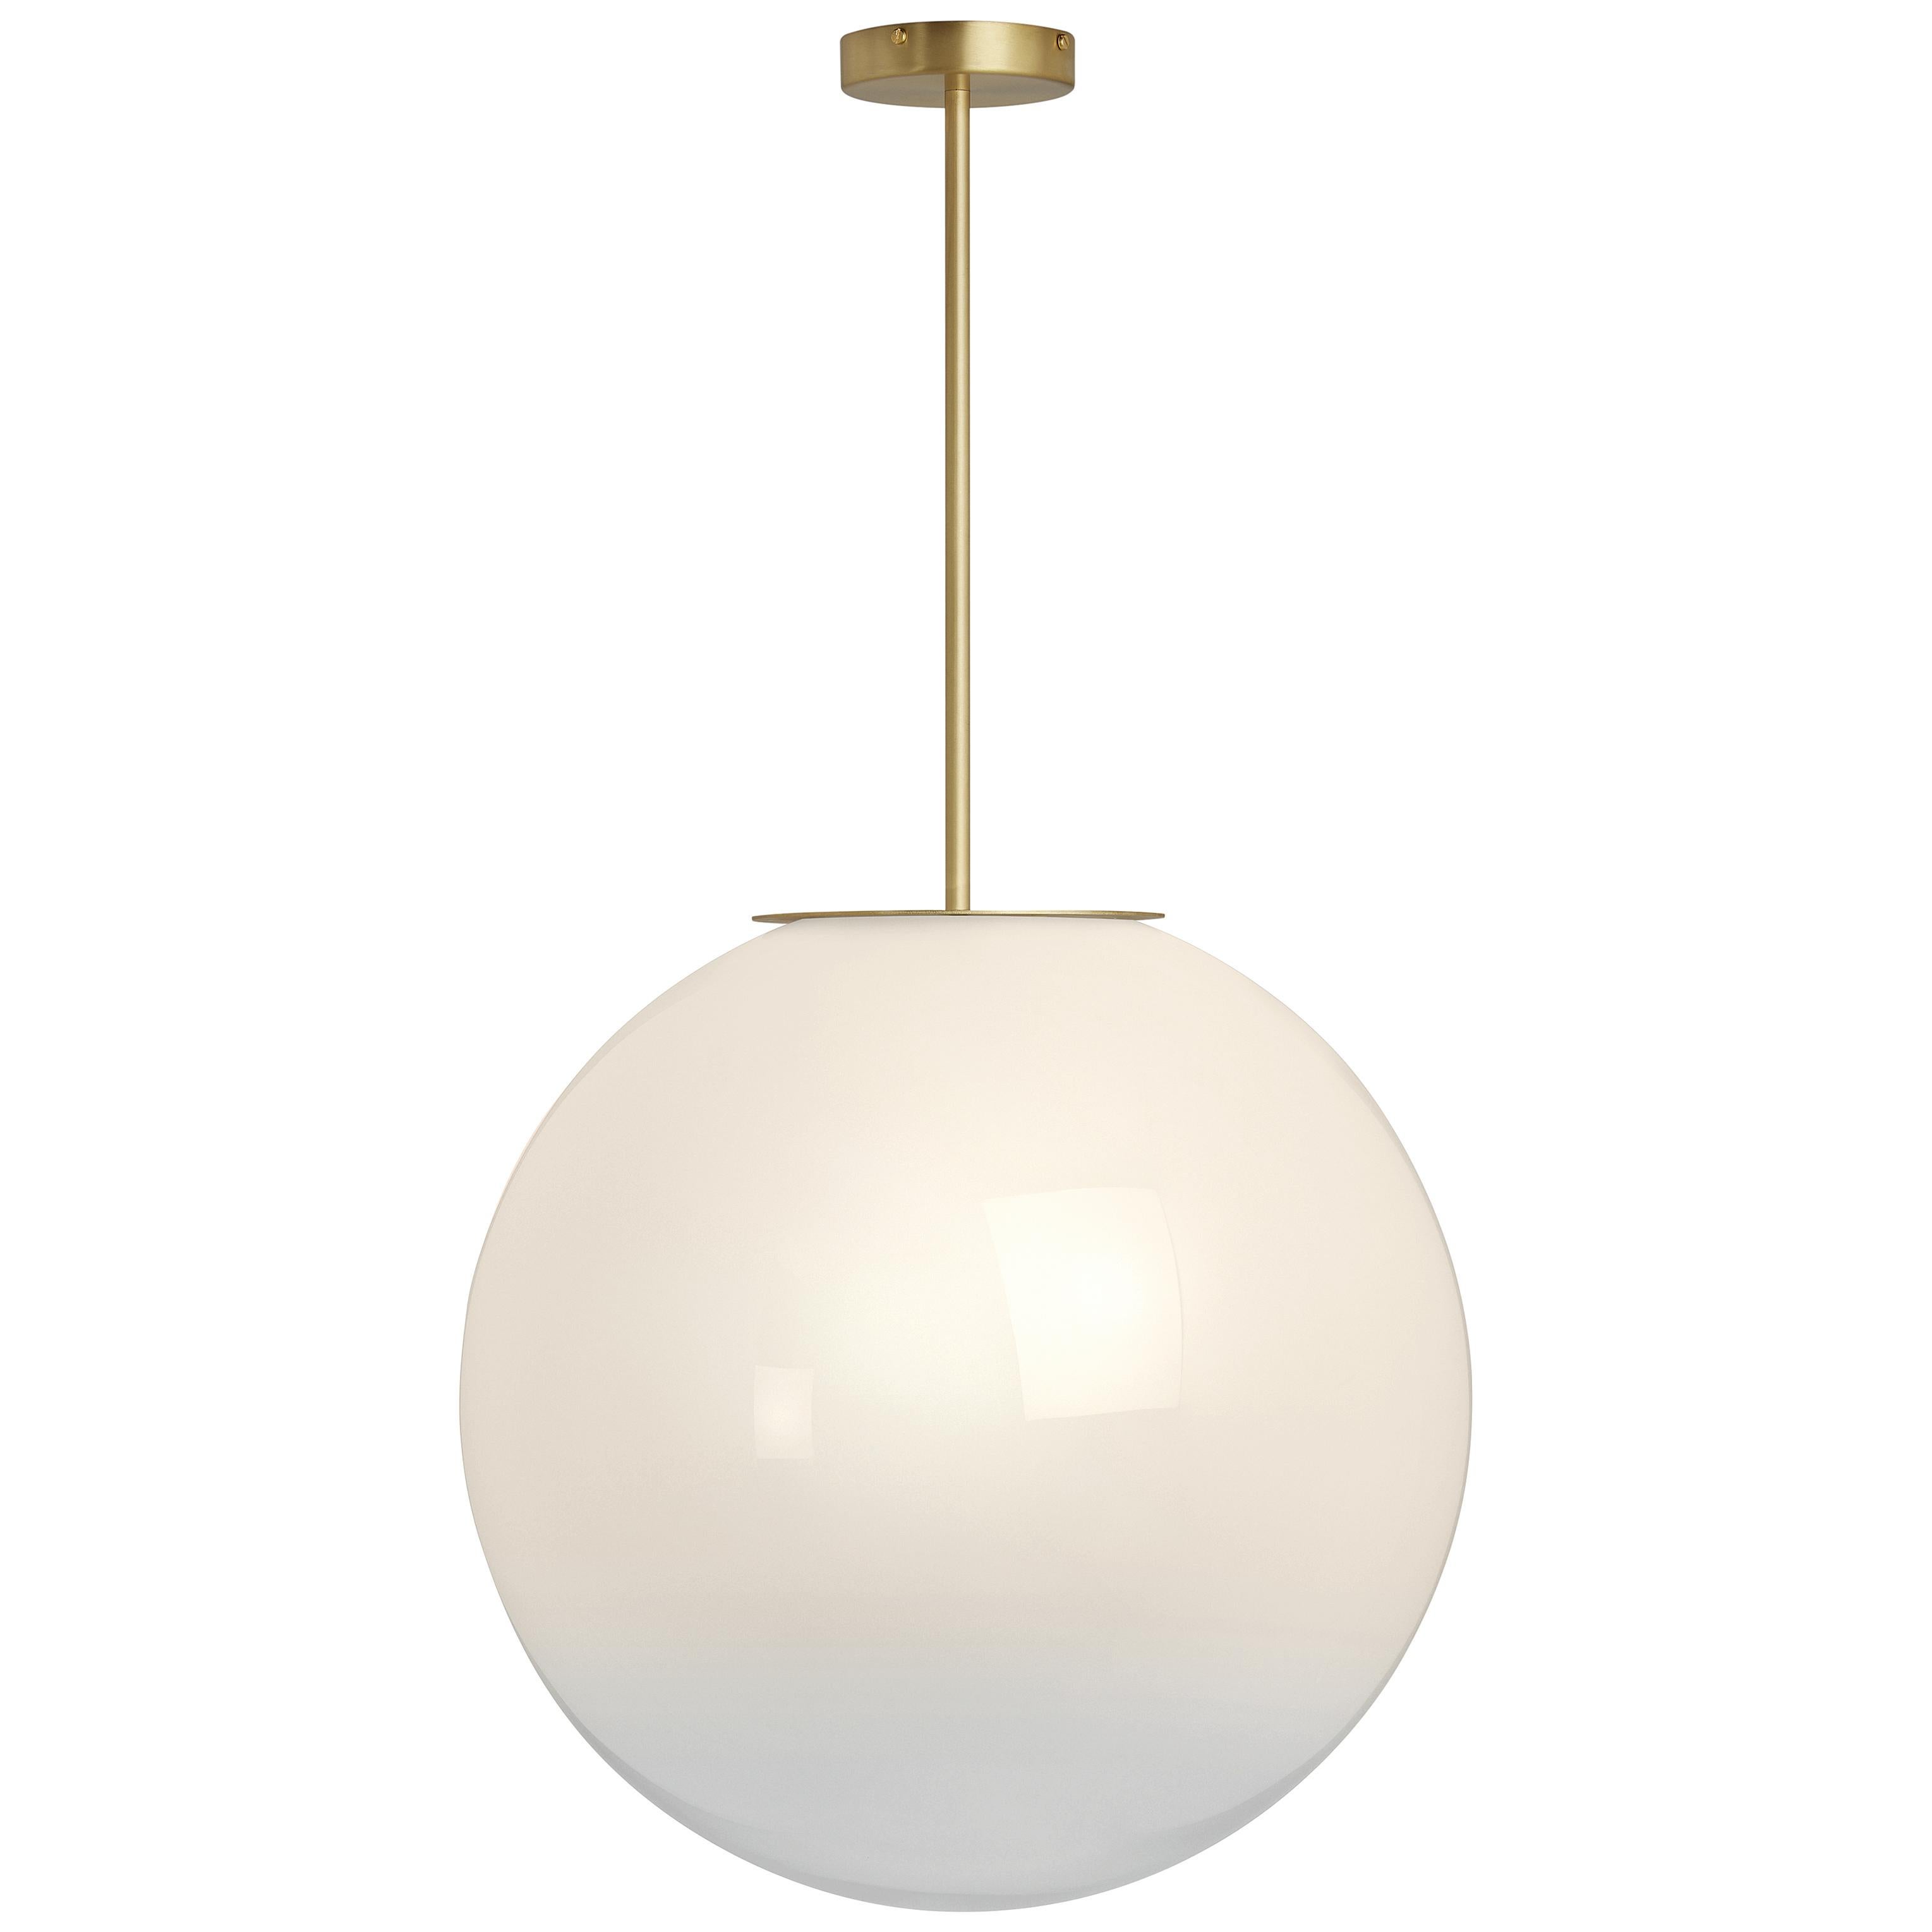 Skye large pendant by CTO Lighting
Materials: Satin brass with sfumato glass shade
Also available in dark bronze with sfumato glass shade
Dimensions: H 49 x W 50 cm 

All our lamps can be wired according to each country. If sold to the USA it